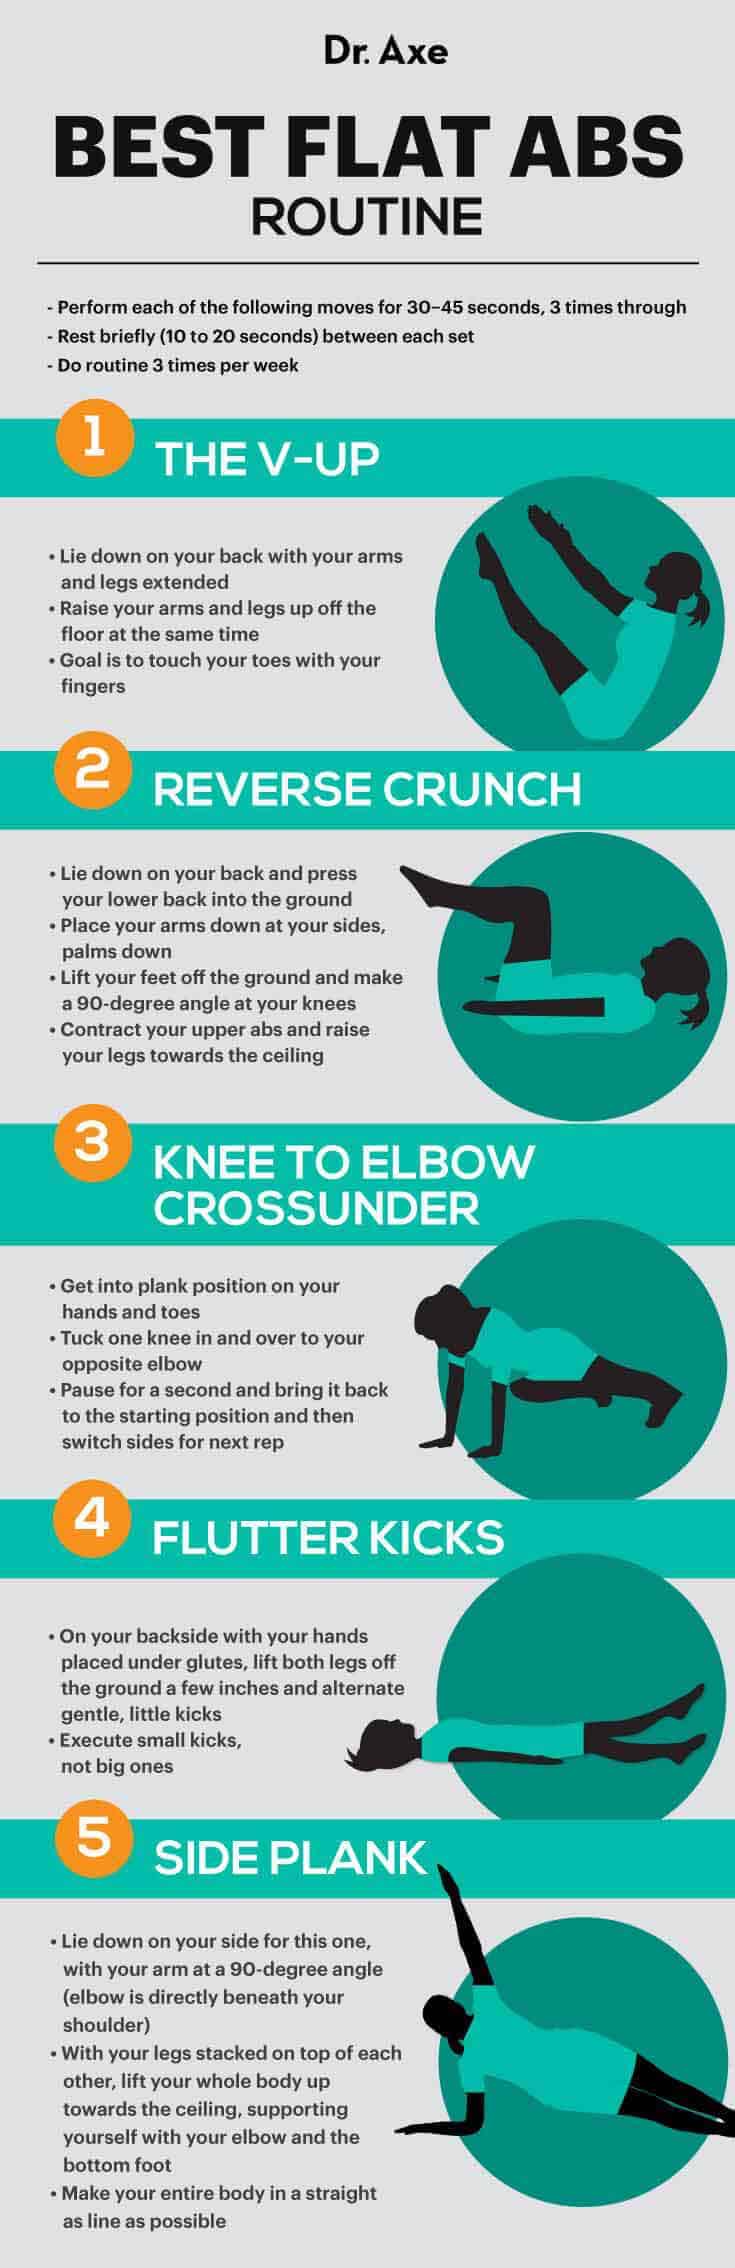 Ab workout - Dr. Axe